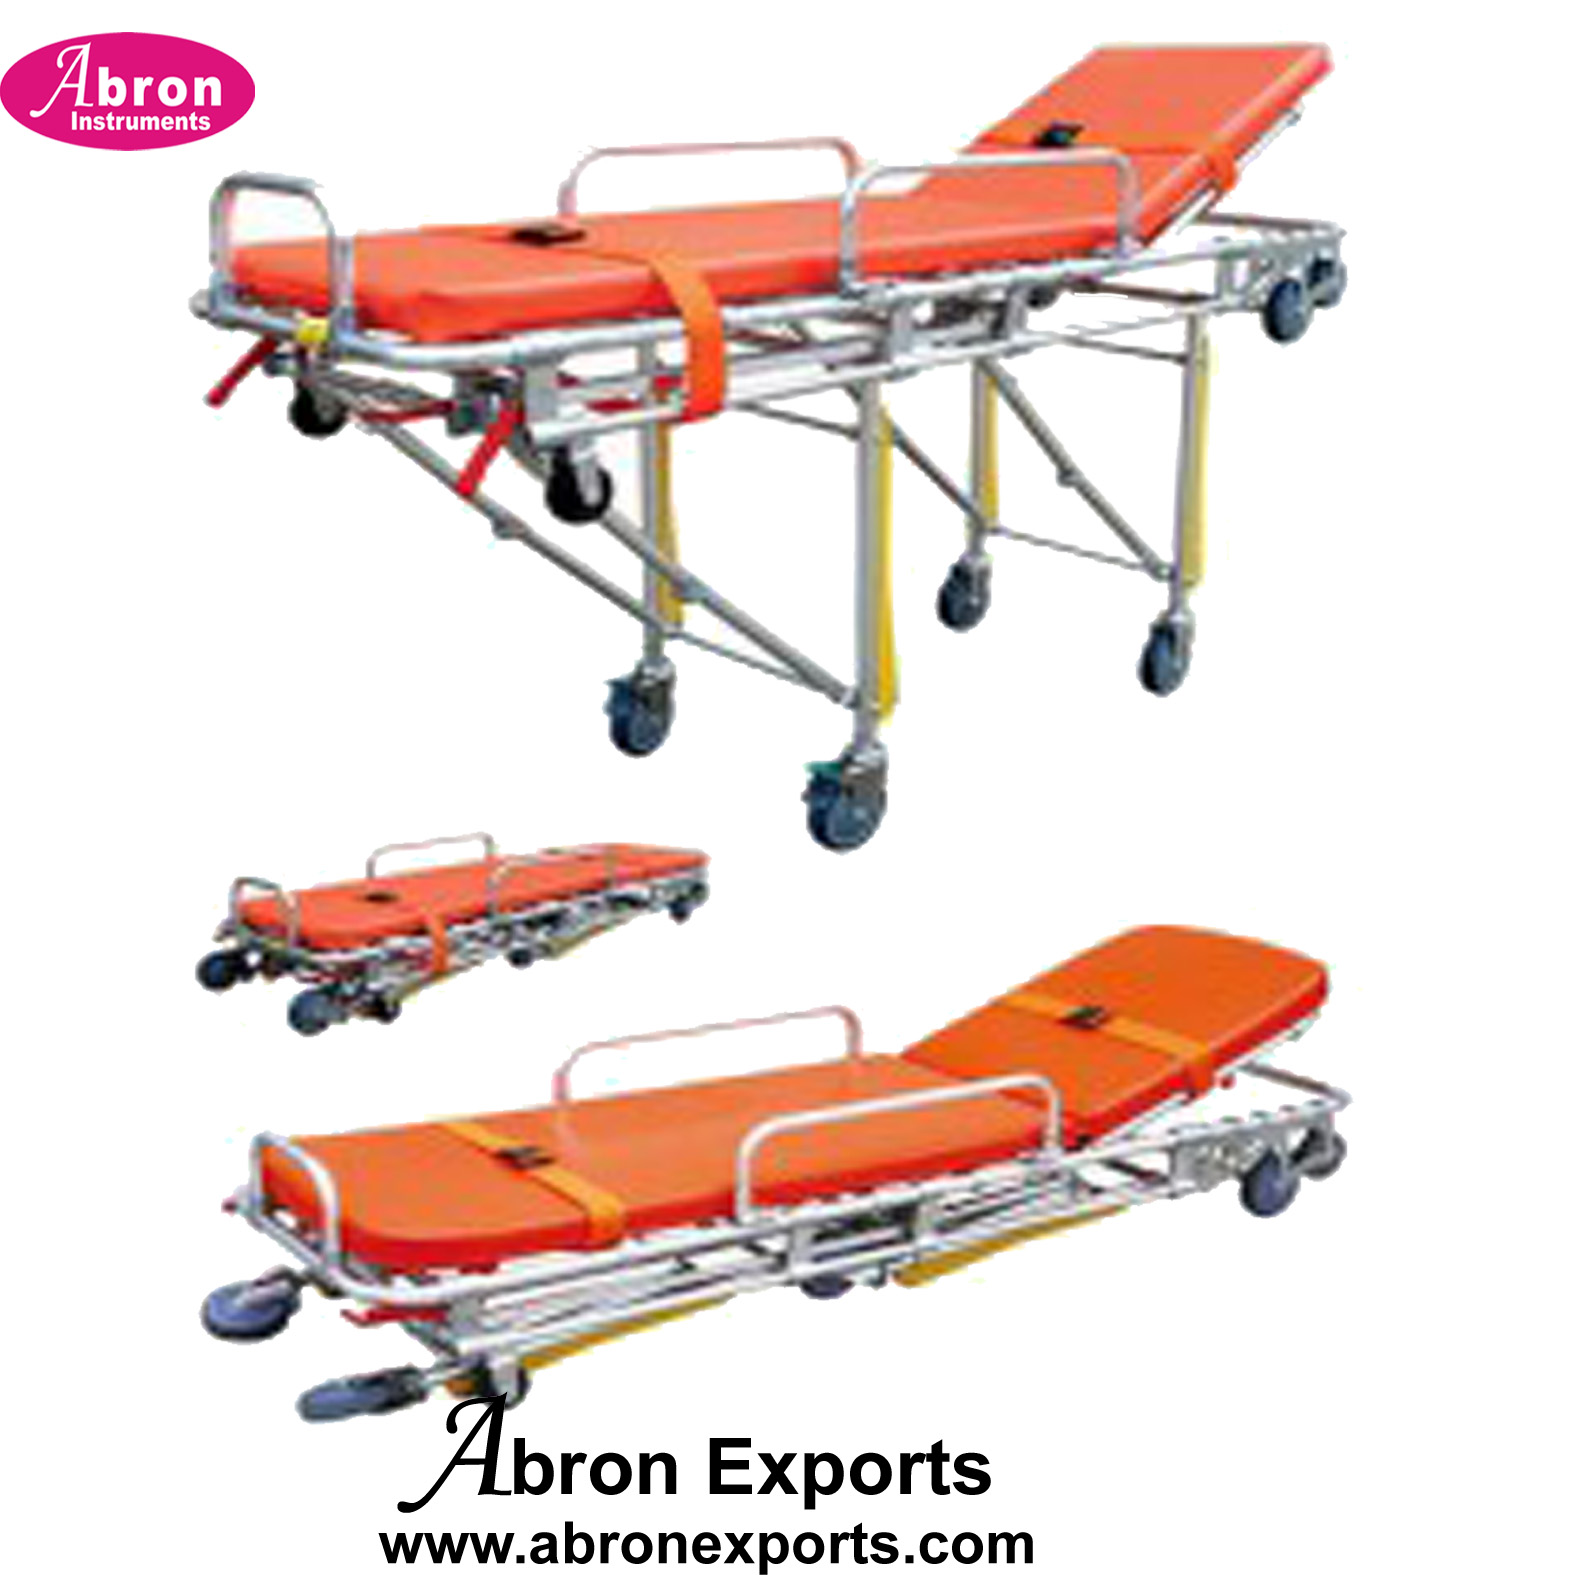 Stretcher Patient Trolley Ambulance with Matress Cum Wheel Chair Auto loader Collapsible Medical Use Folding Abron ABM-2261SM 